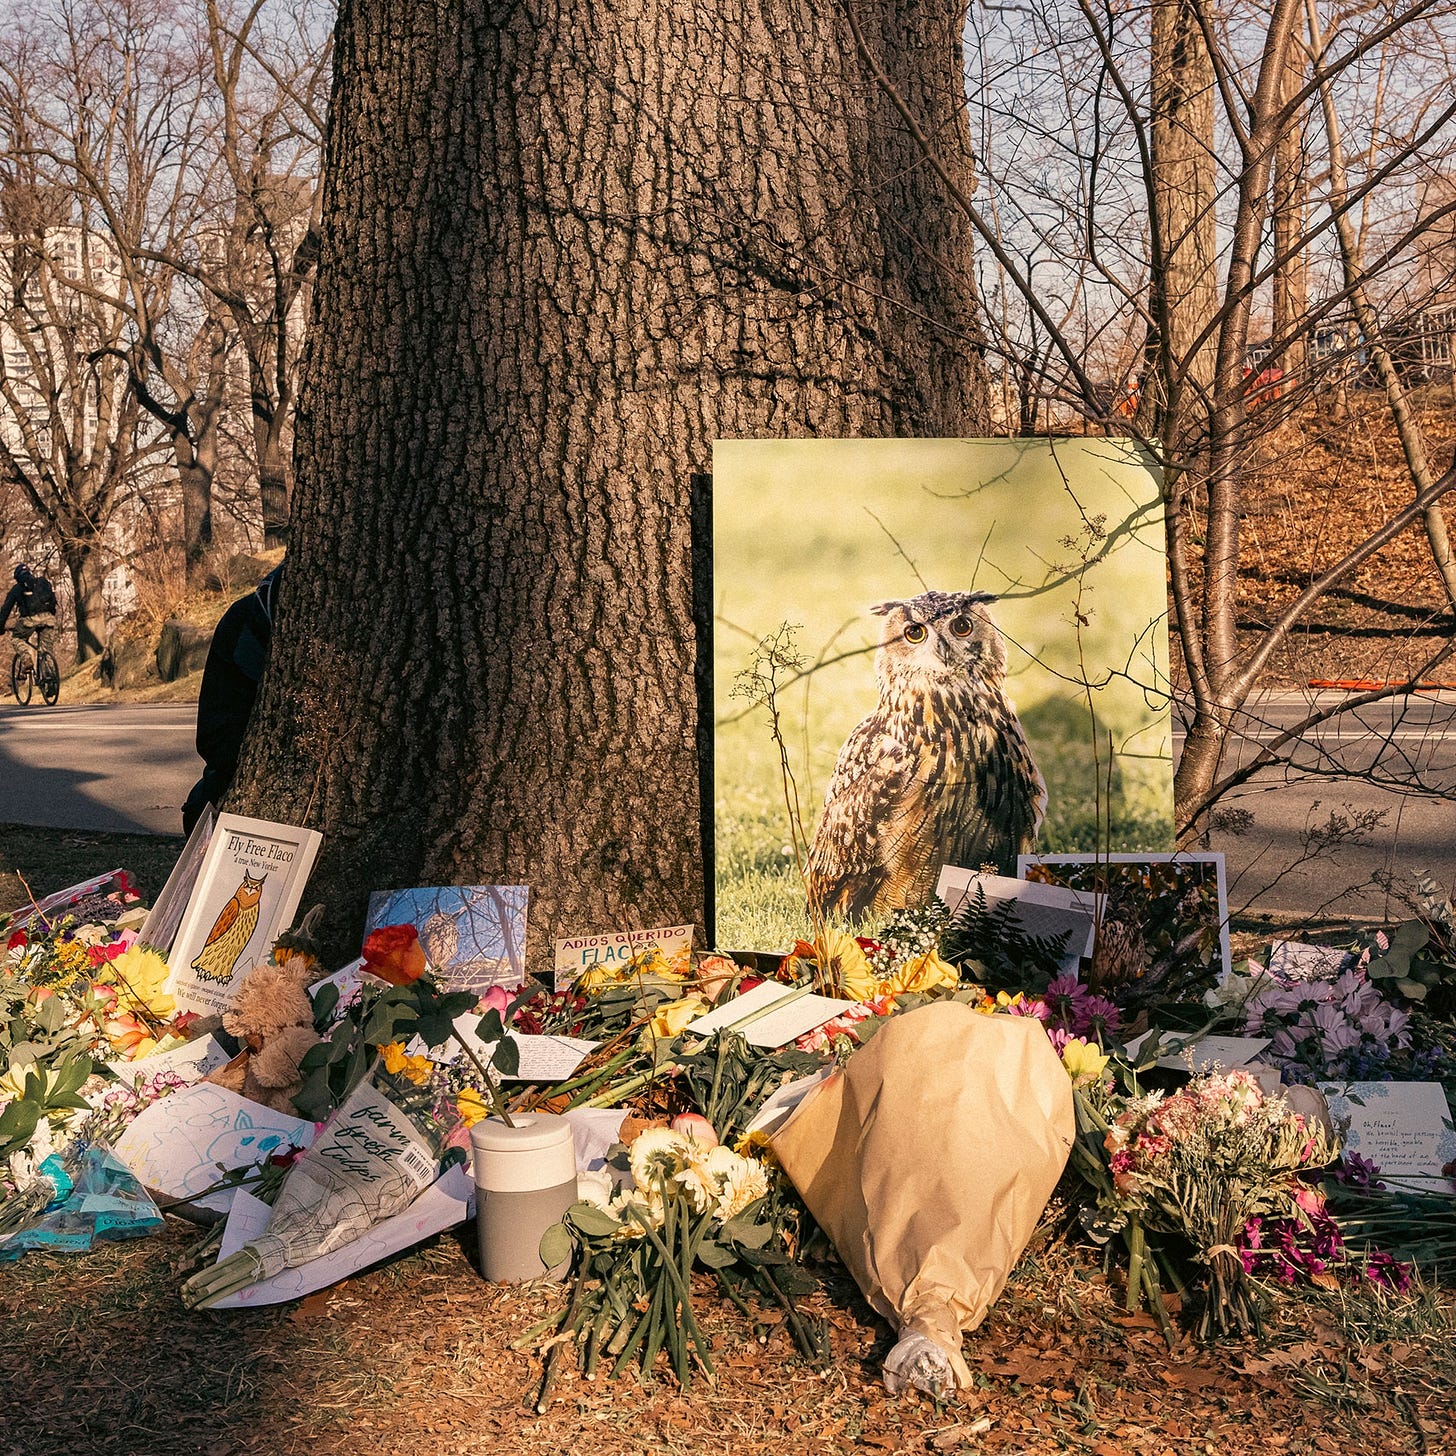 Mourning Flaco, the Owl Who Escaped | The New Yorker